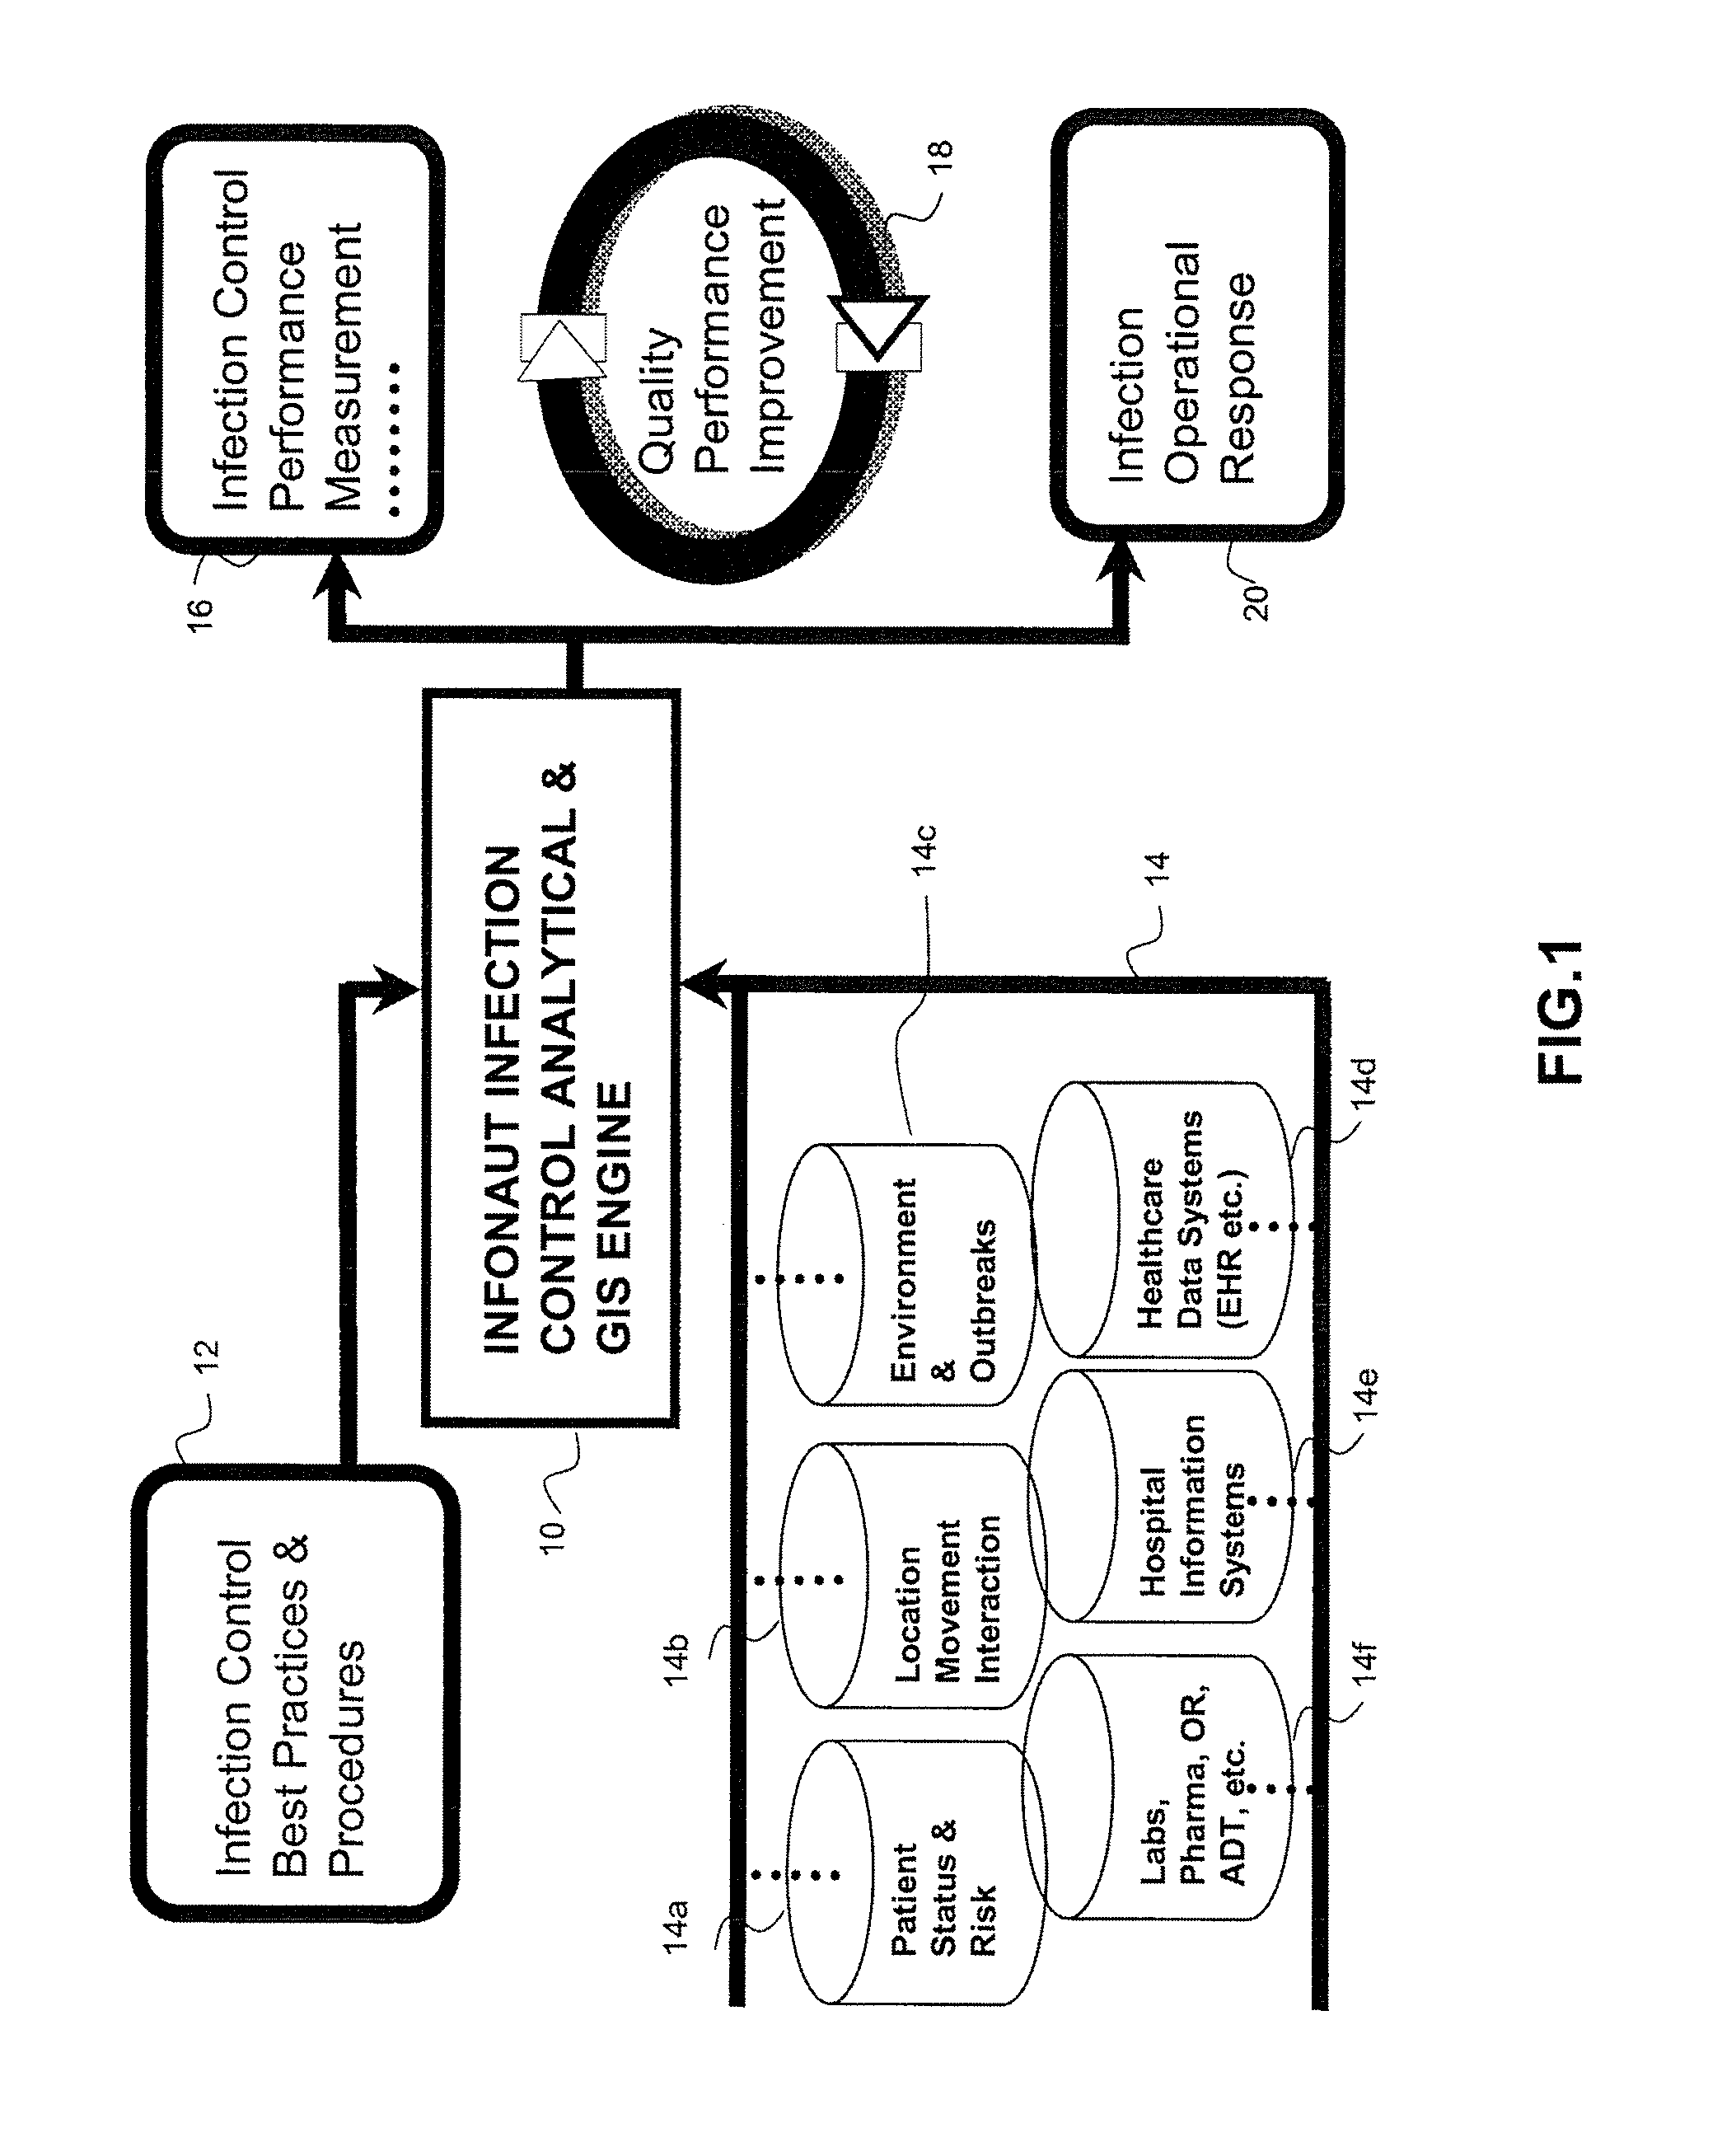 Disease Mapping and Infection Control System and Method